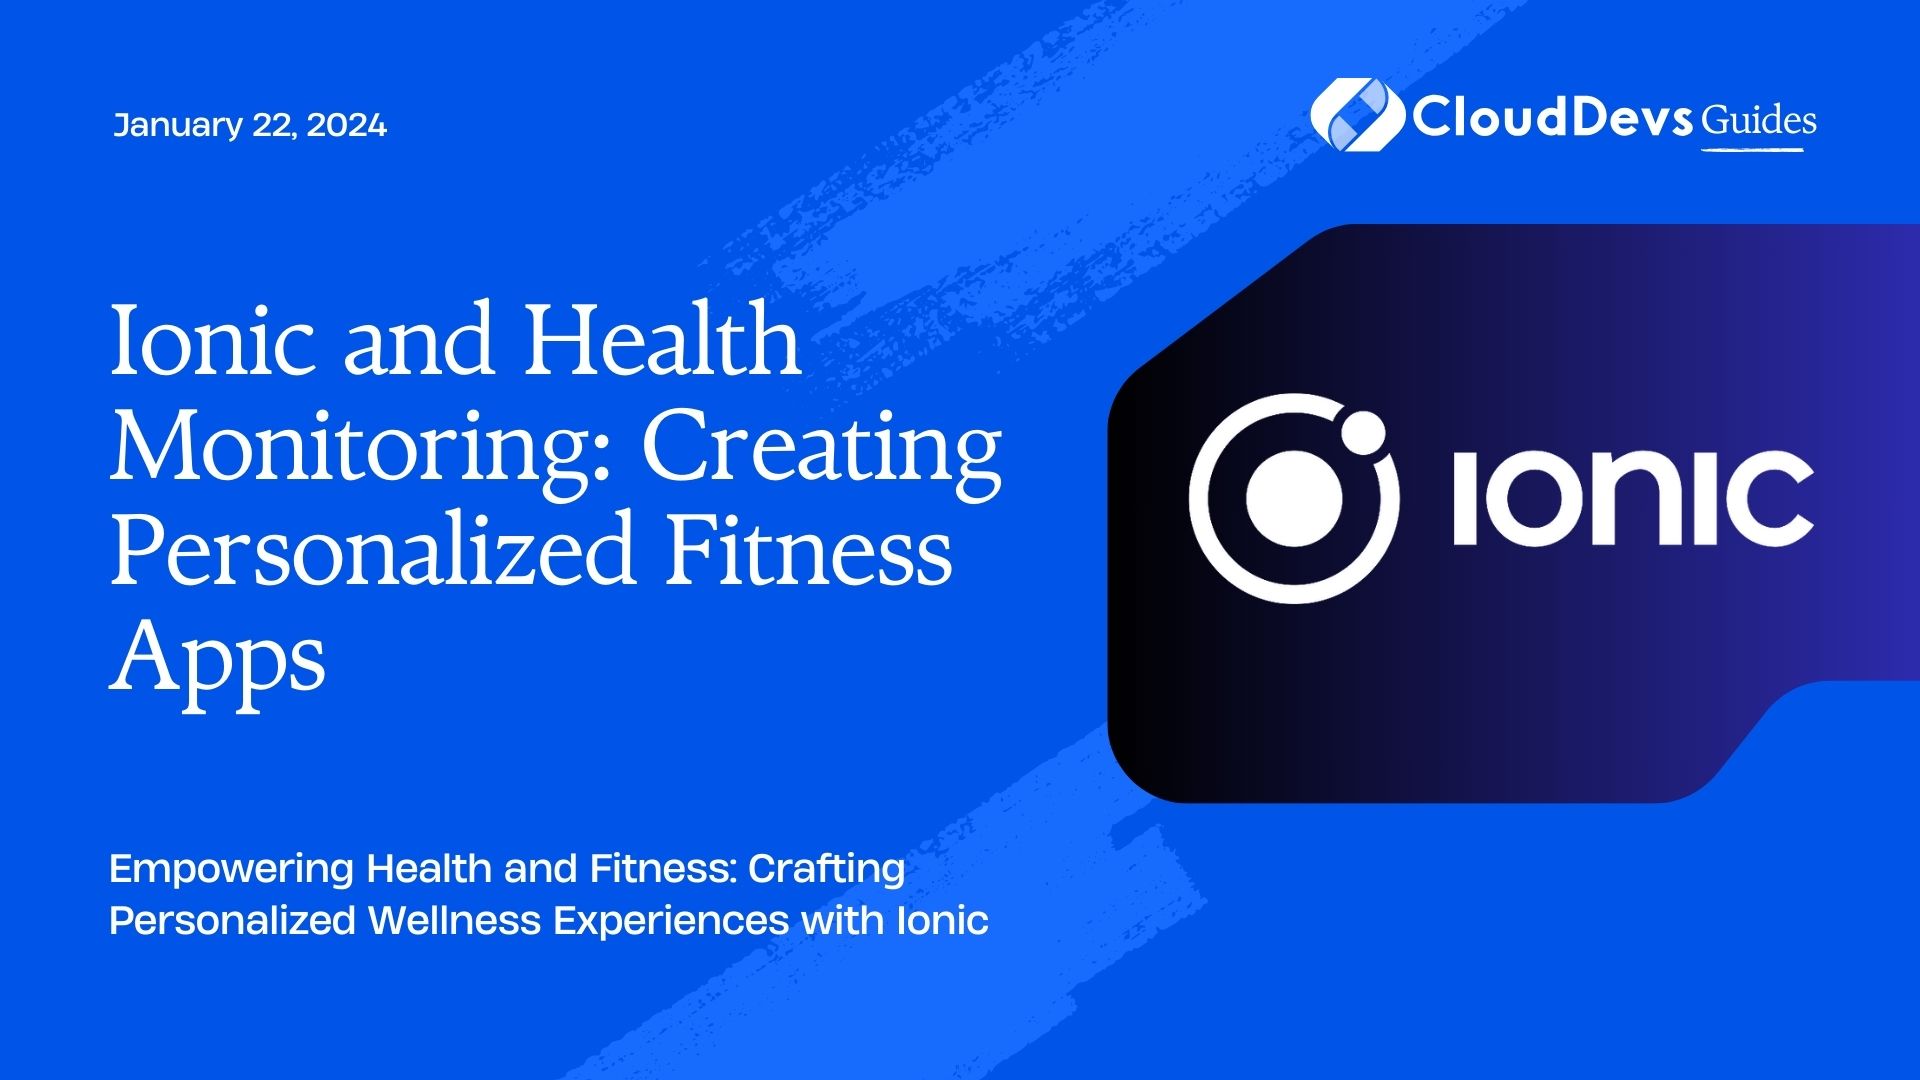 Ionic and Health Monitoring: Creating Personalized Fitness Apps